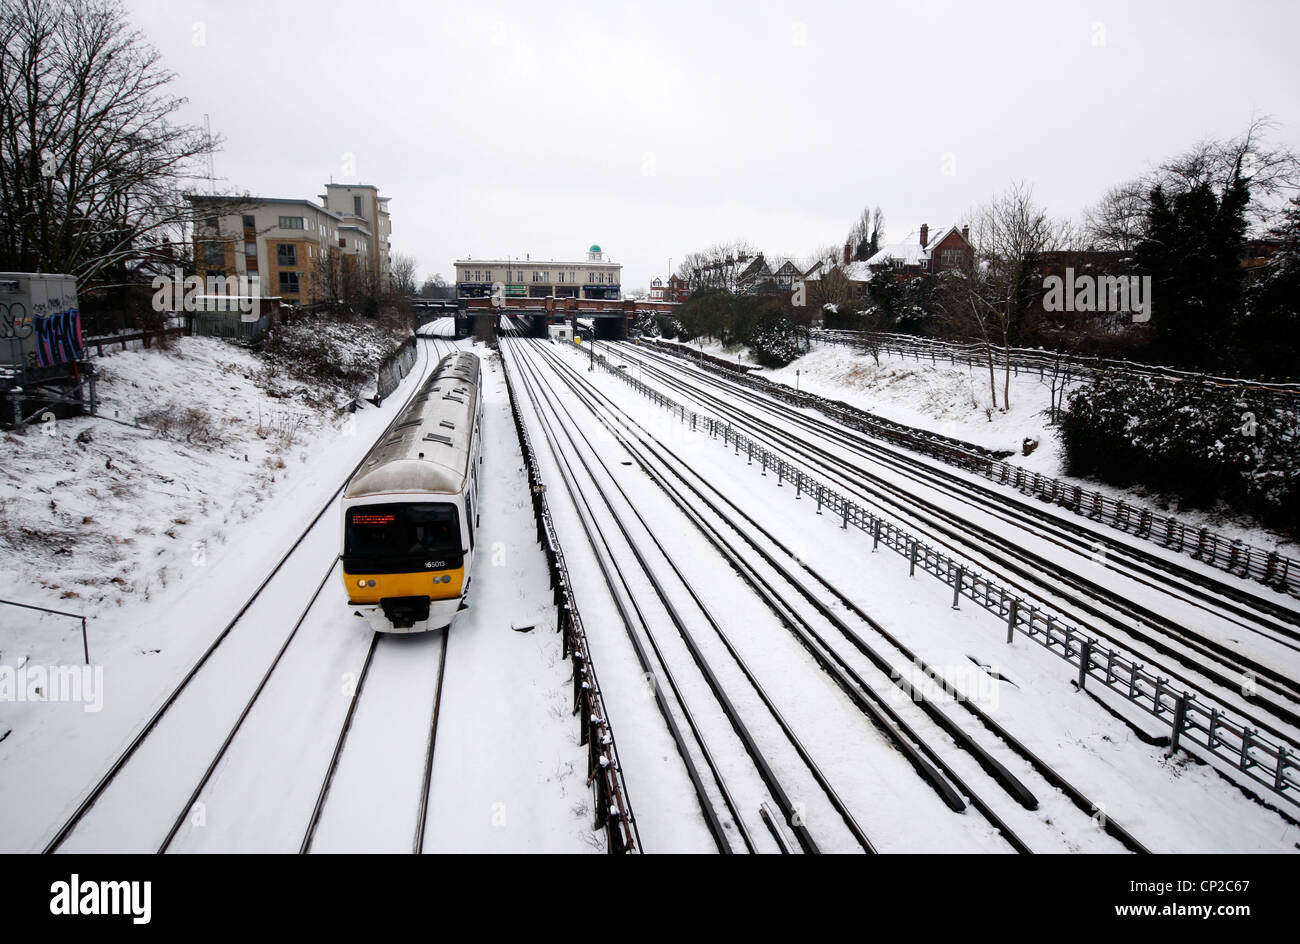 Commuter train making its way into London during the snow Stock Photo